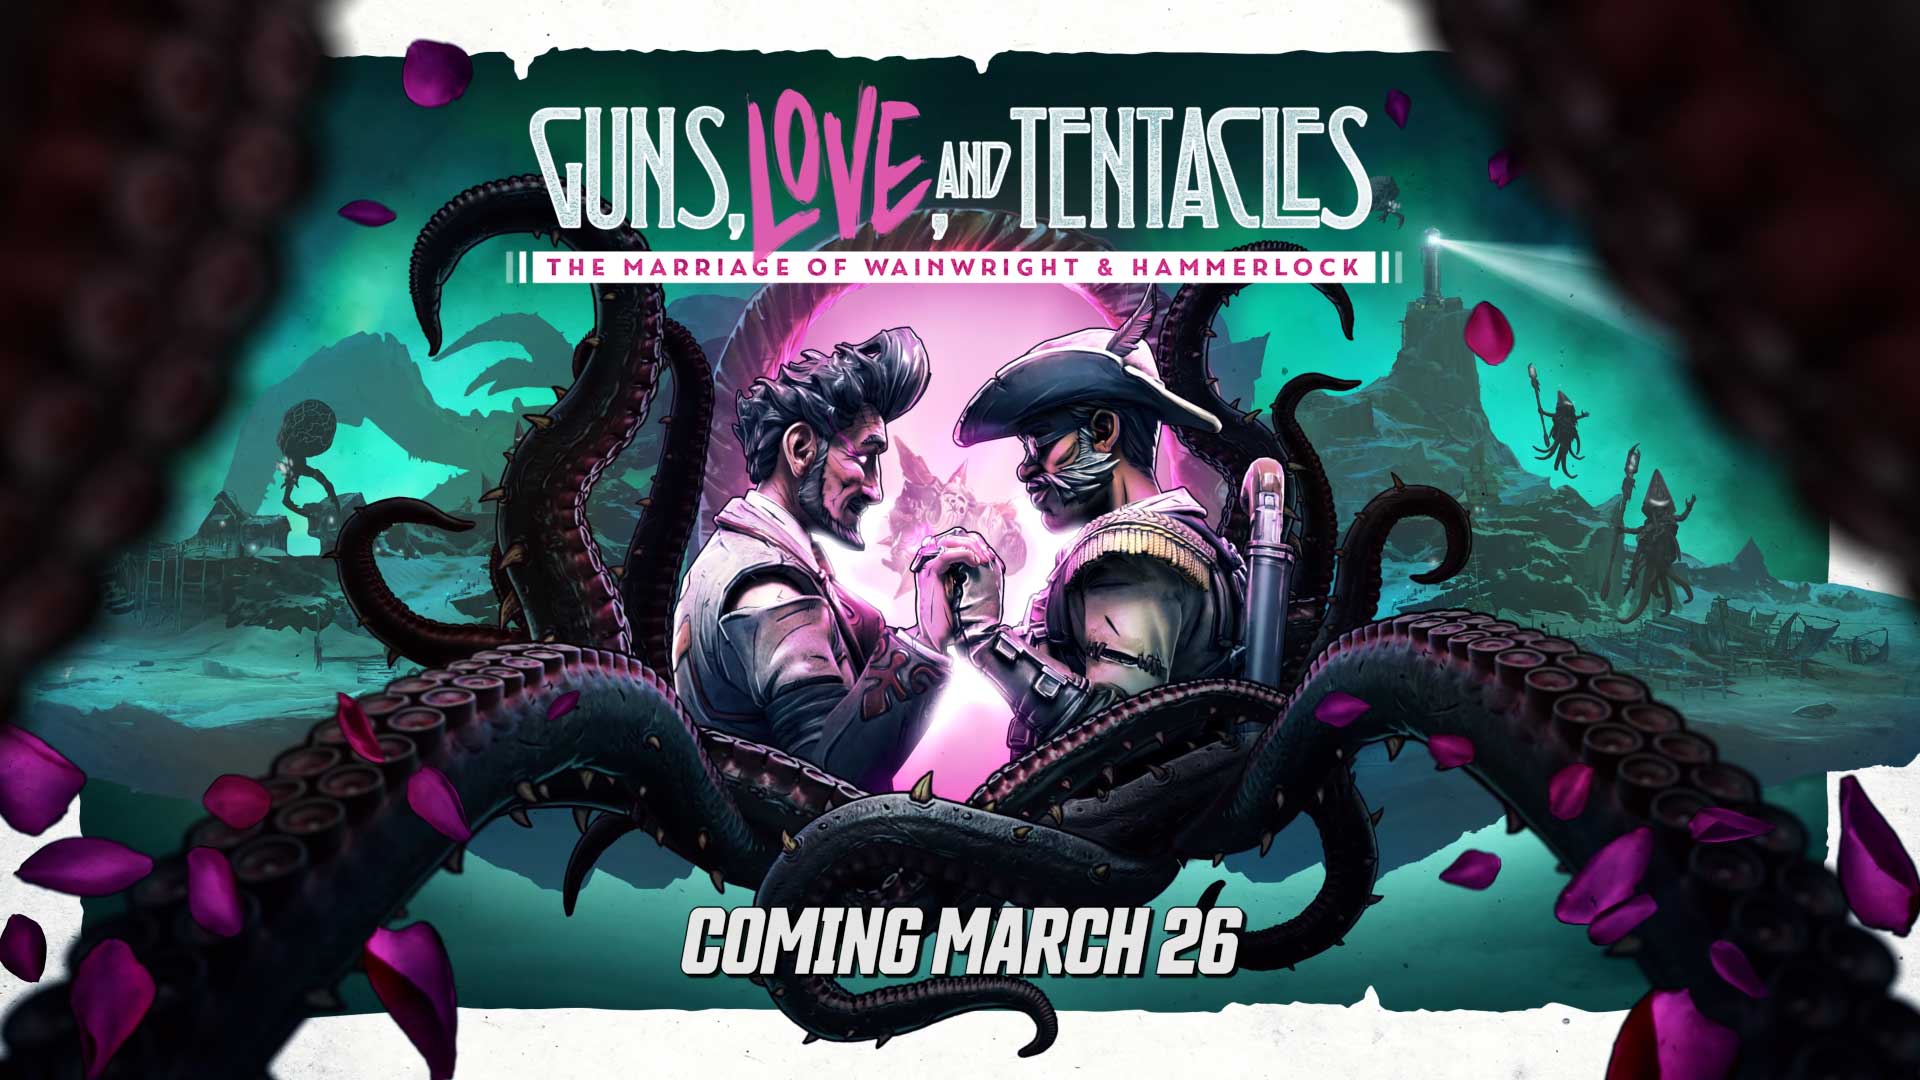 Borderlands 3 DLC Steam Epic games Store Guns, Love and Tentacles - The Marriage of Wainwright and Hammerlock